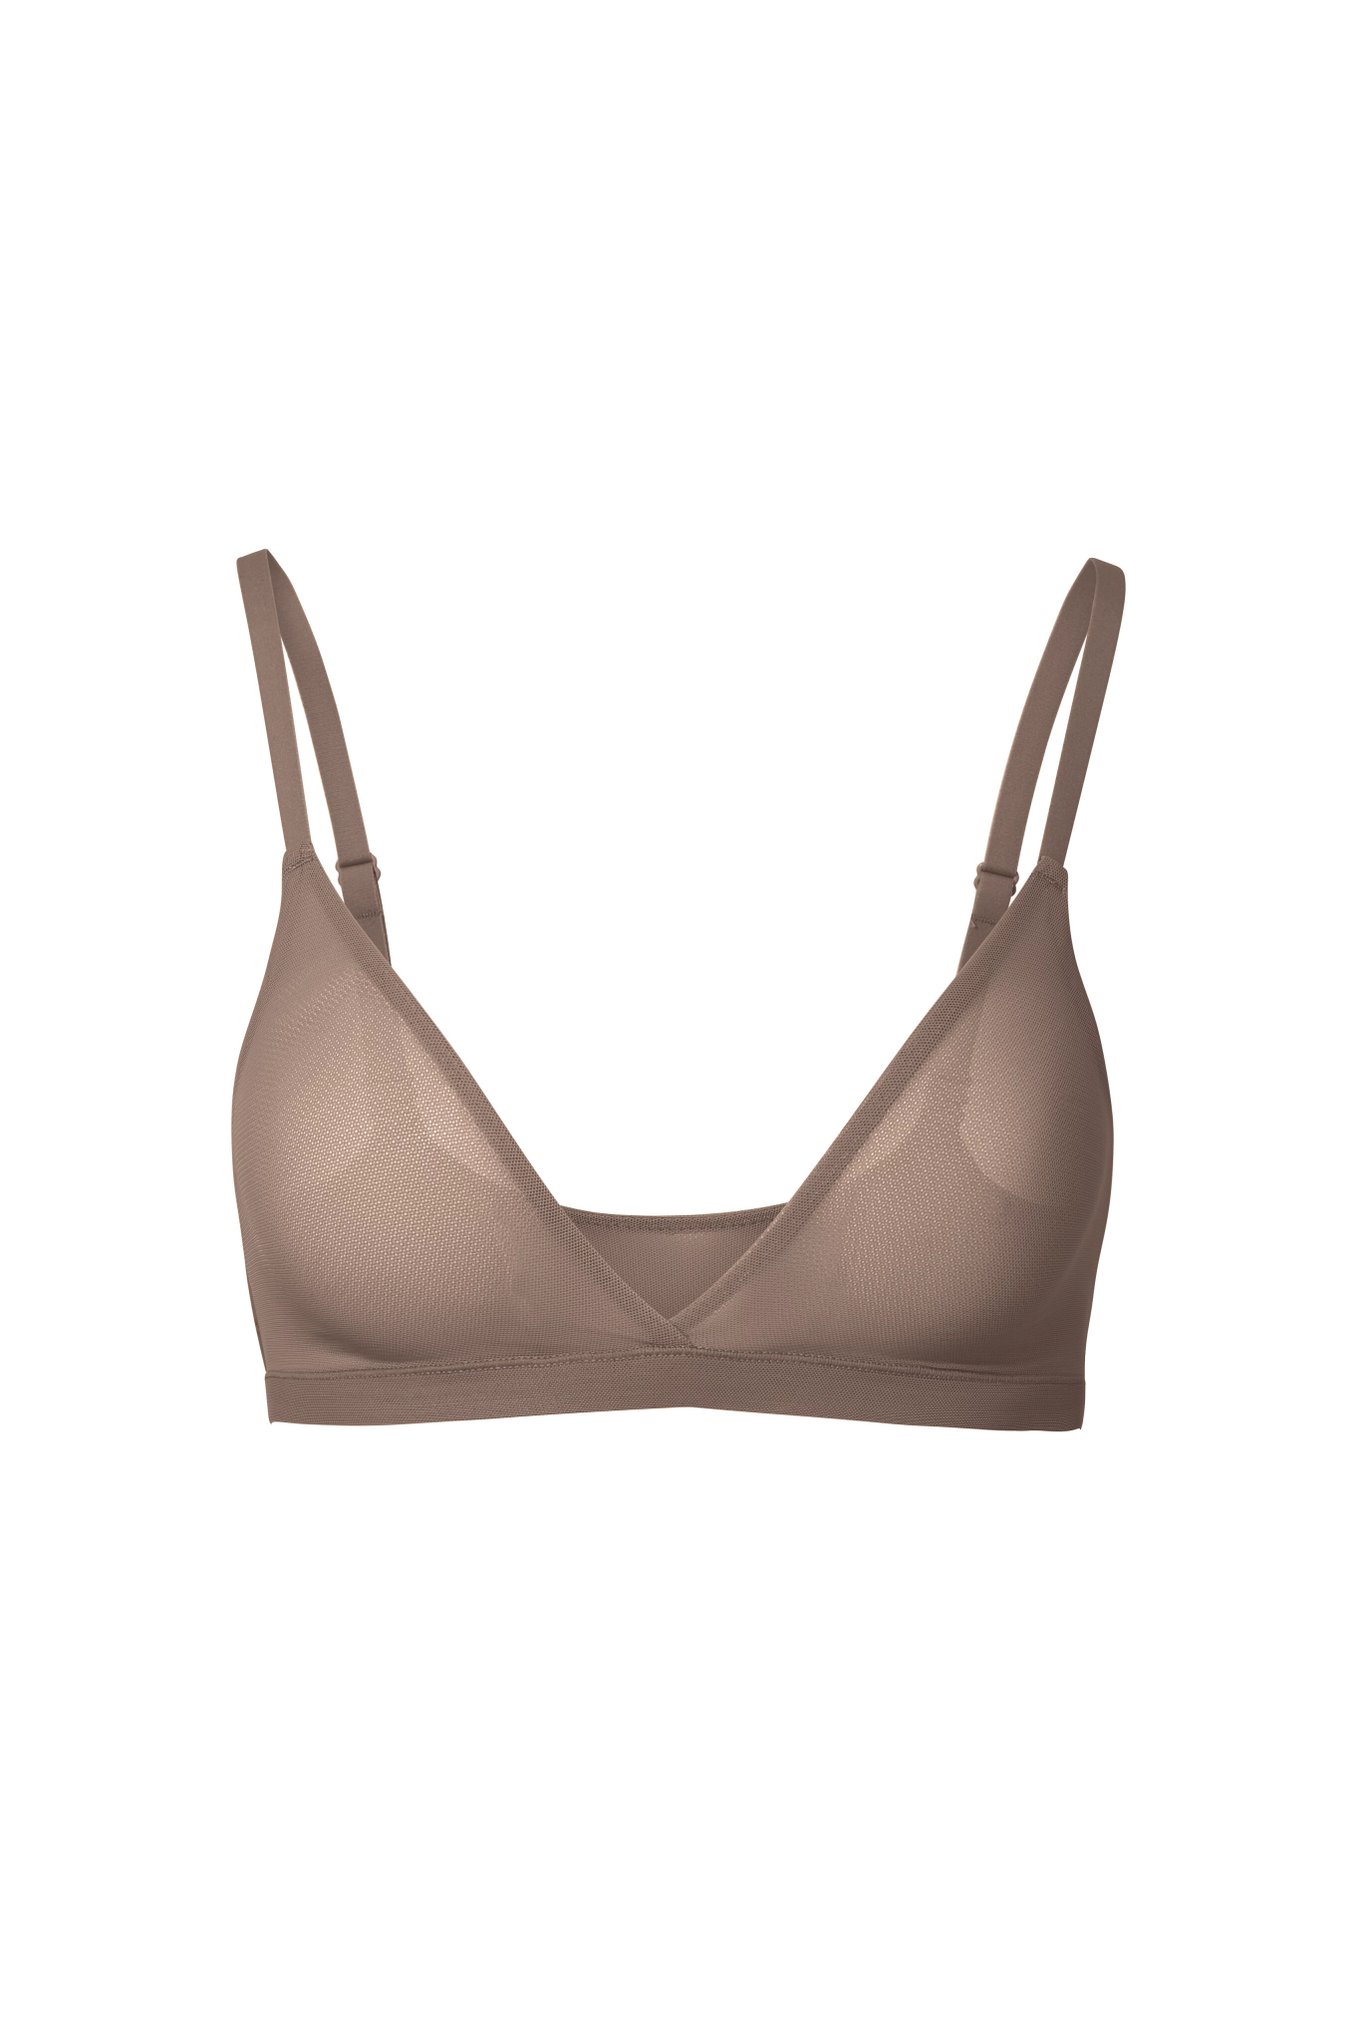 Brown WOMAN Lace Strappy Triangle Bralette 2060397